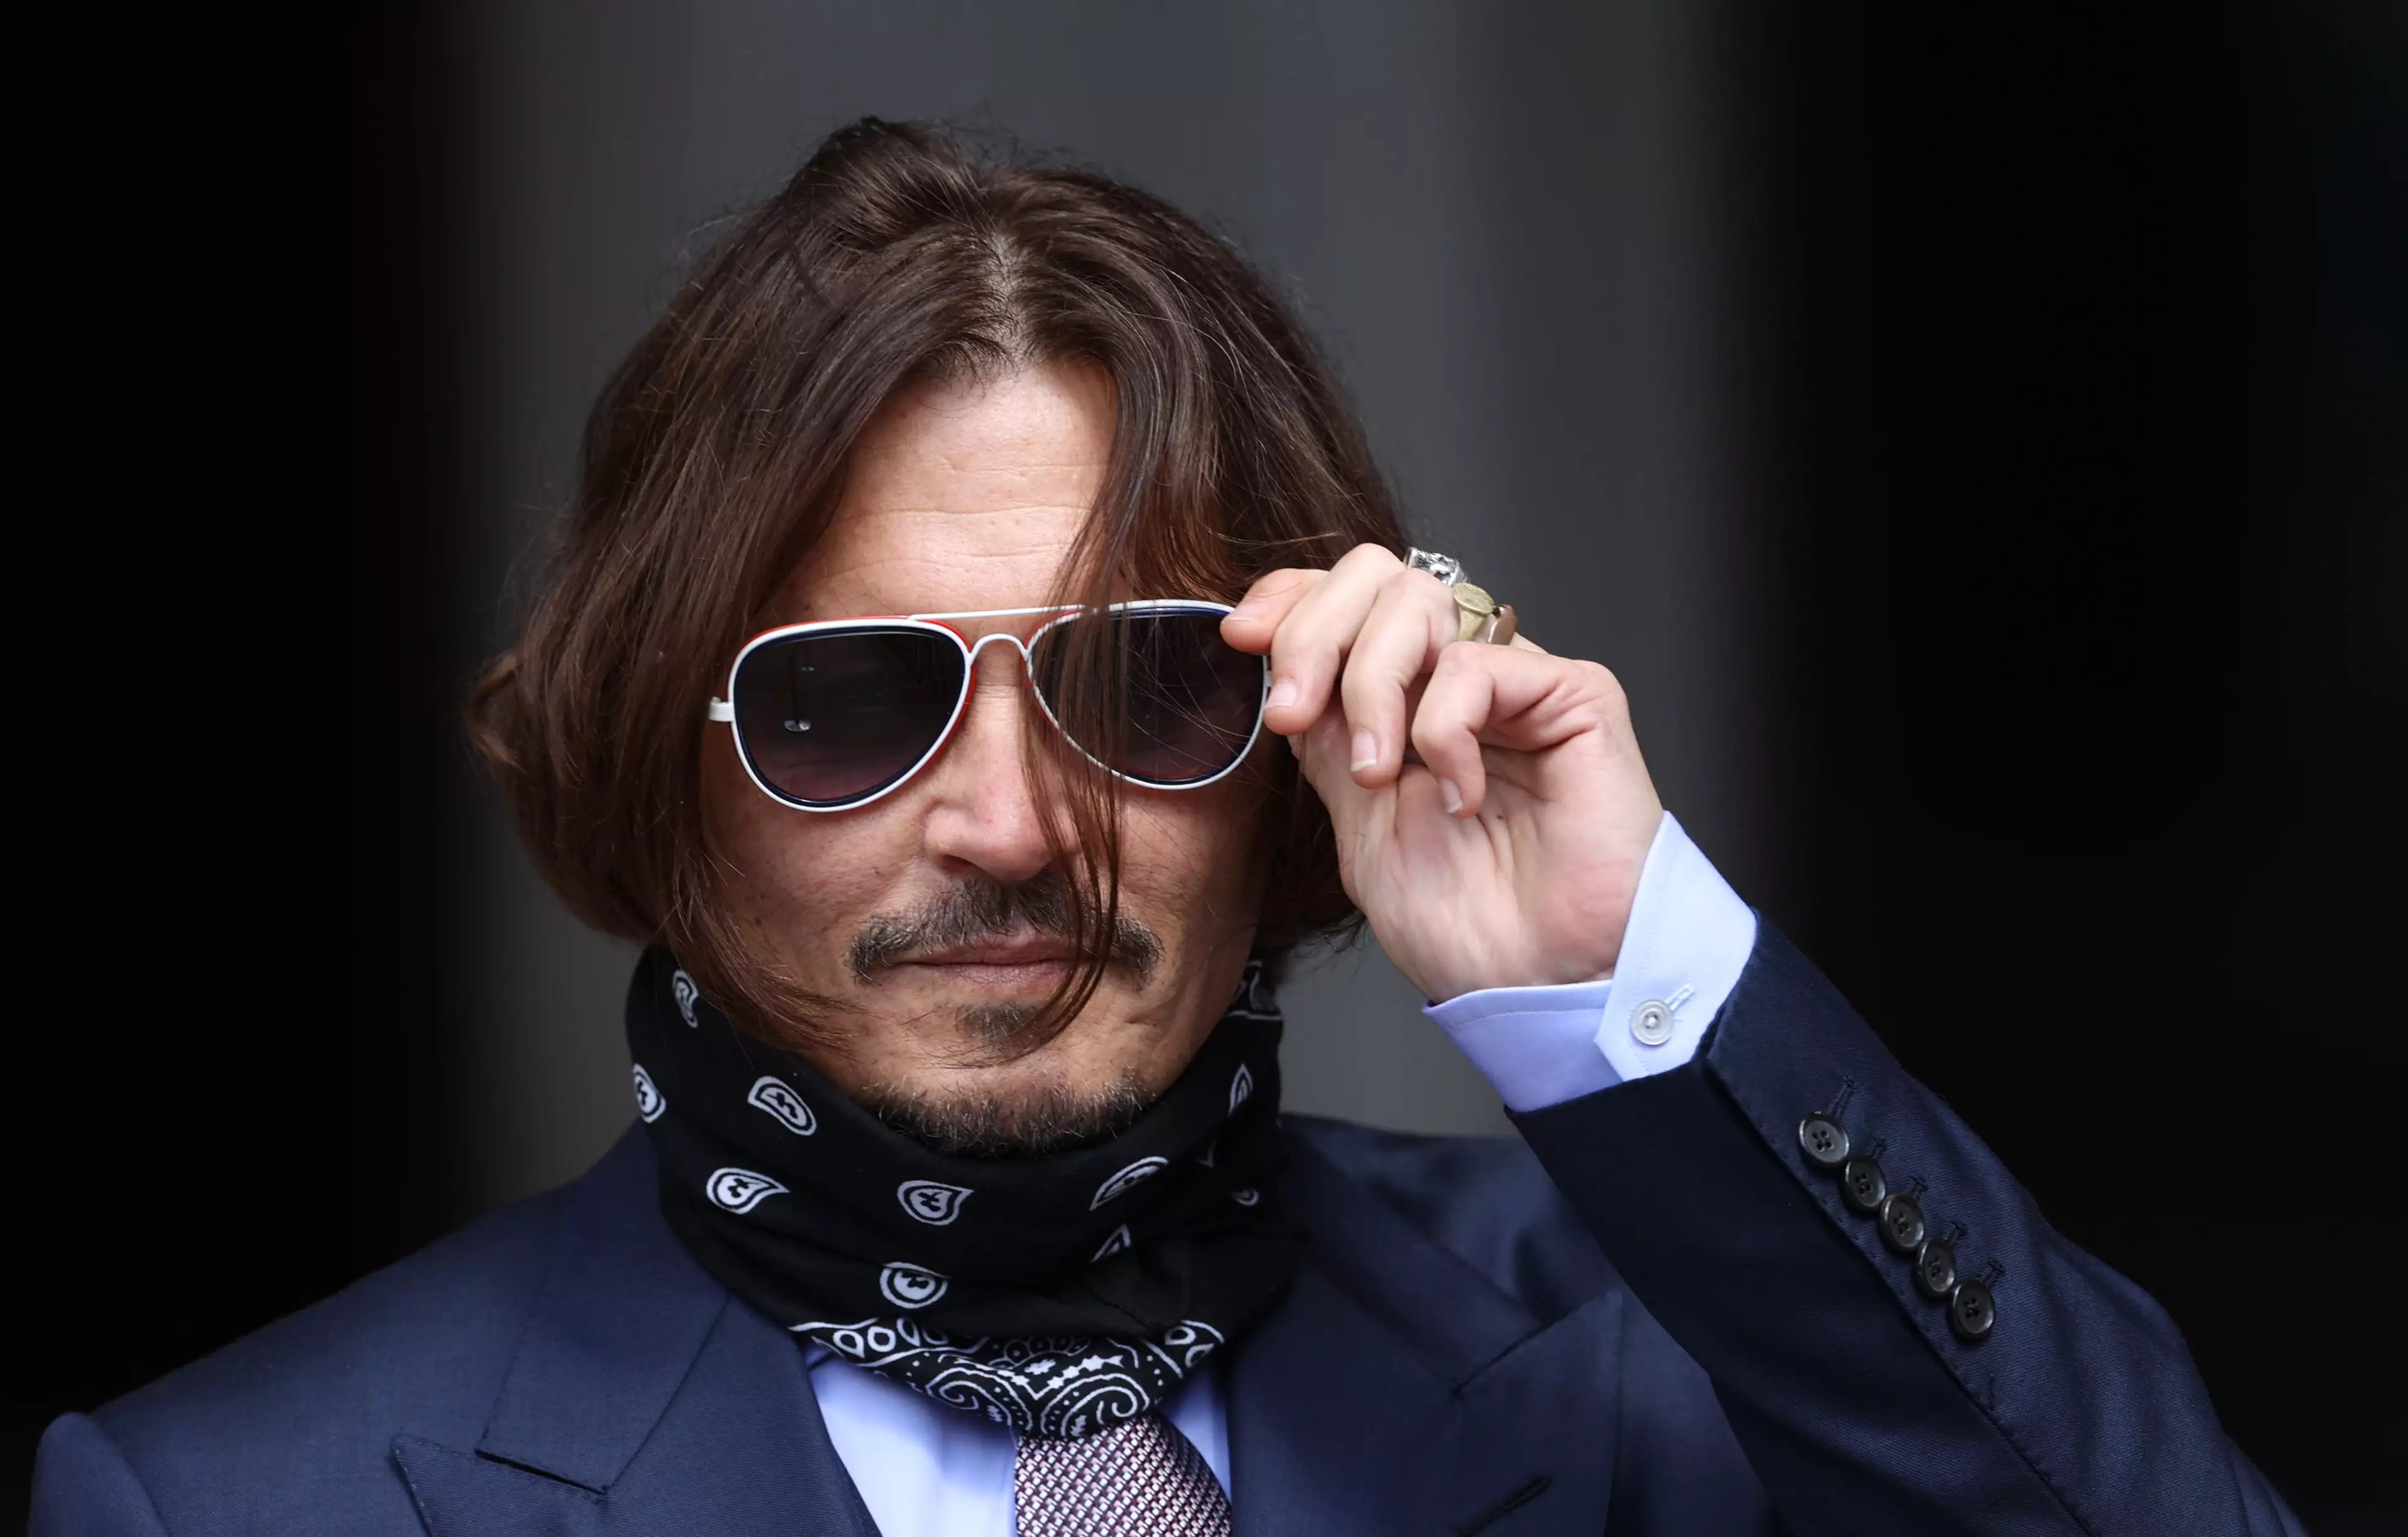 Depp plans to mount an appeal.